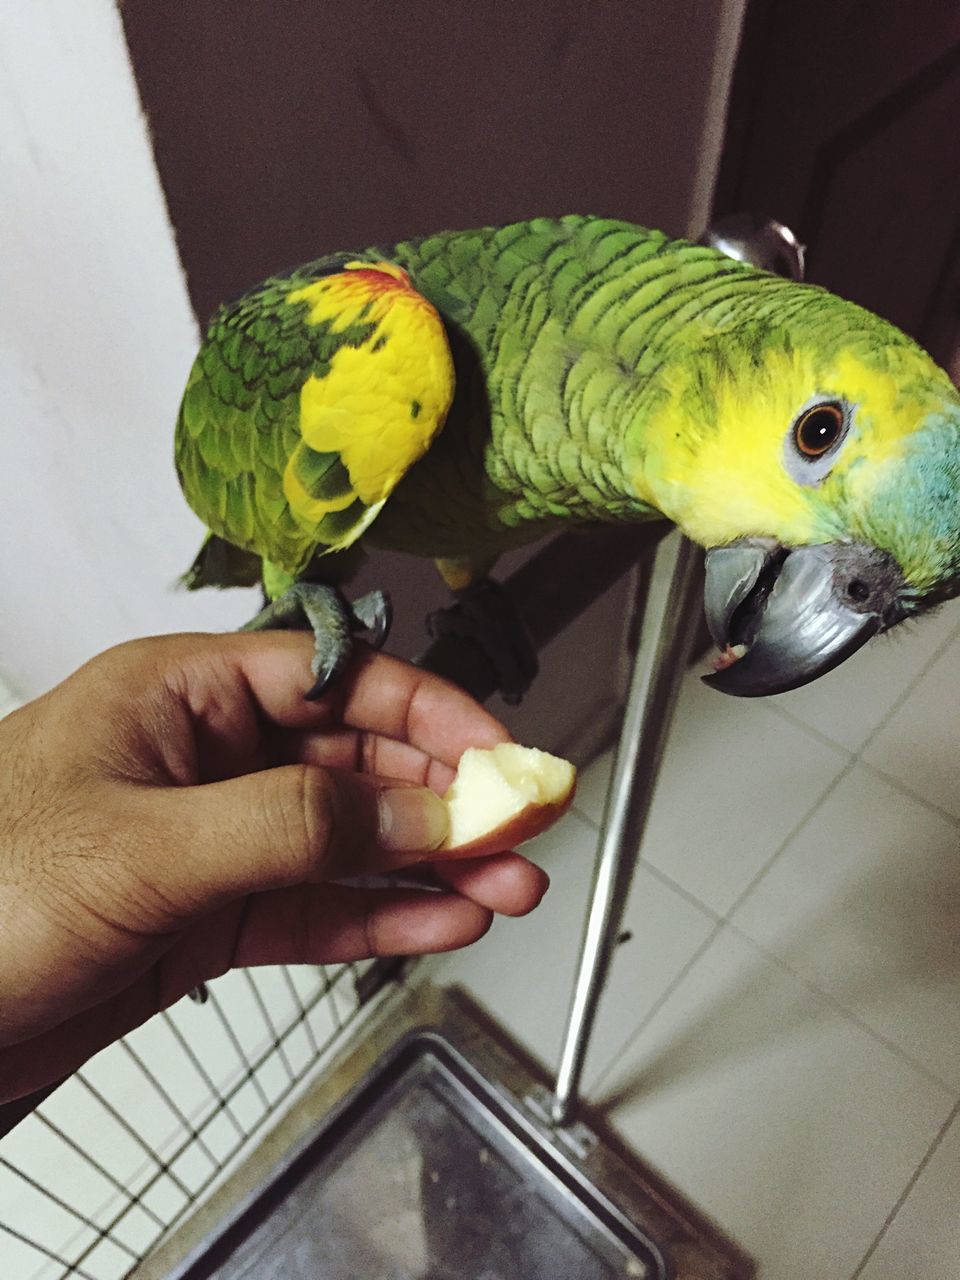 animal themes, bird, one animal, animals in the wild, parrot, wildlife, close-up, yellow, perching, beak, focus on foreground, indoors, holding, person, animal head, day, one person, side view, multi colored